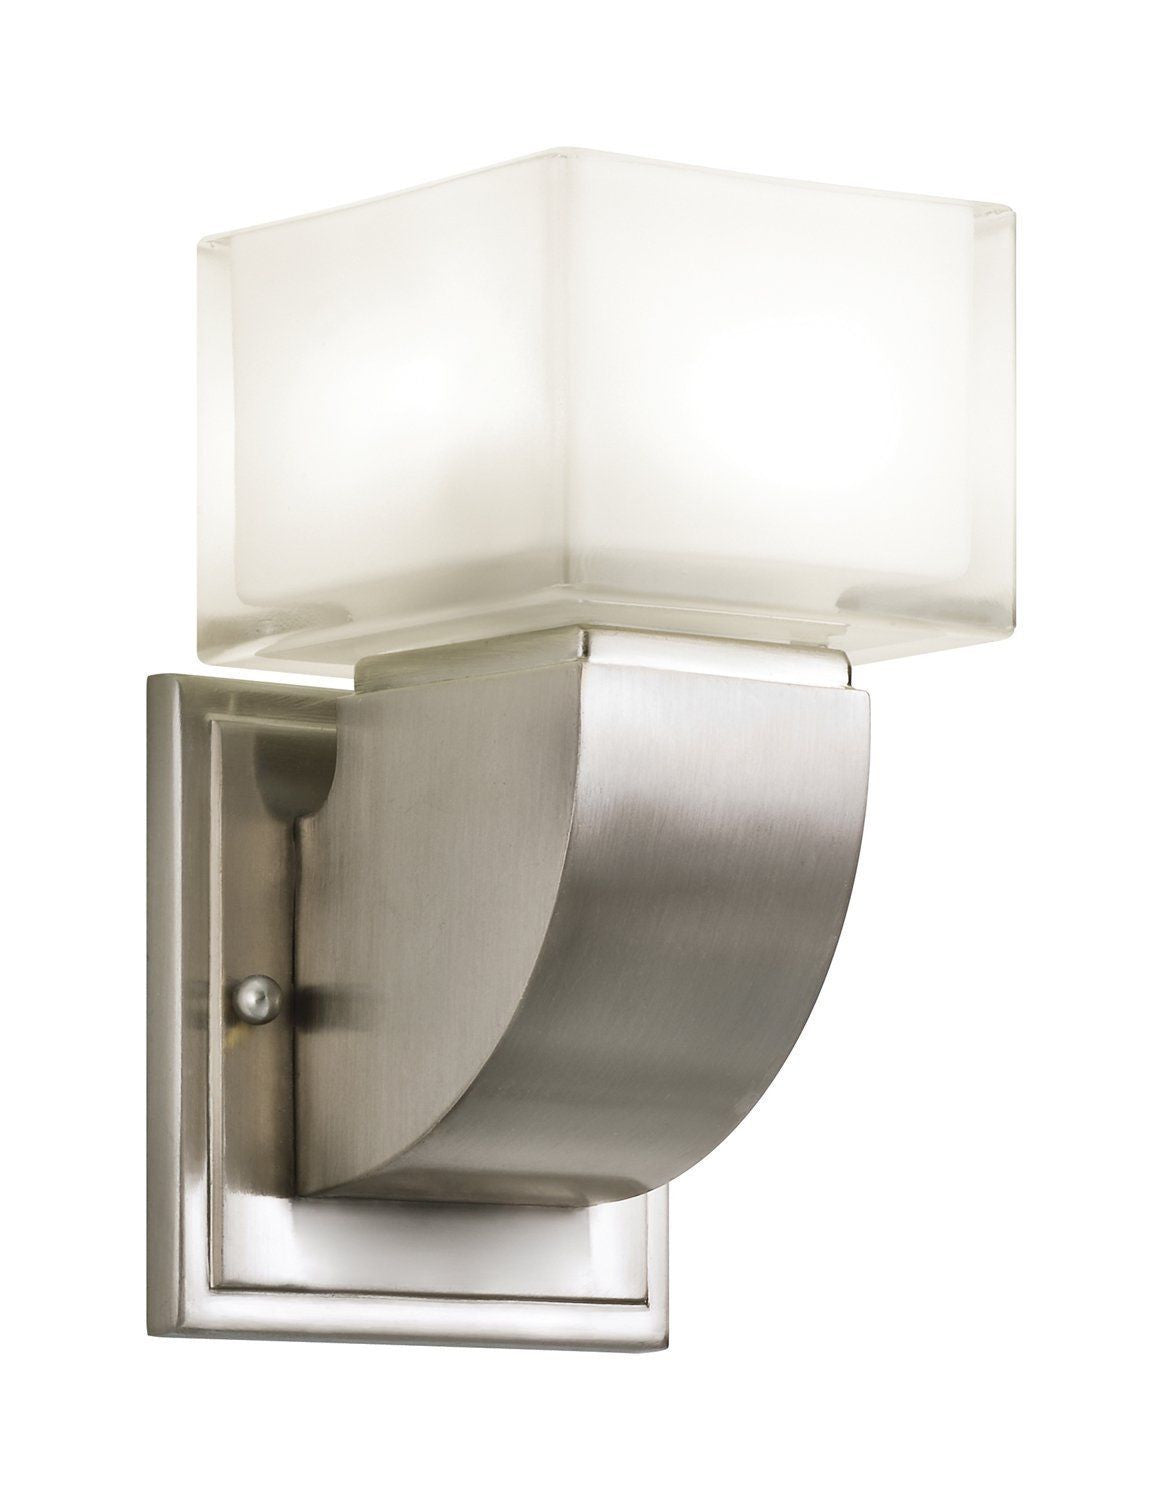 Kichler Lighting 10449 NI Islita Collection One Light GU24 Energy Efficient Fluorescent Wall Sconce in Brushed Nickel Finish